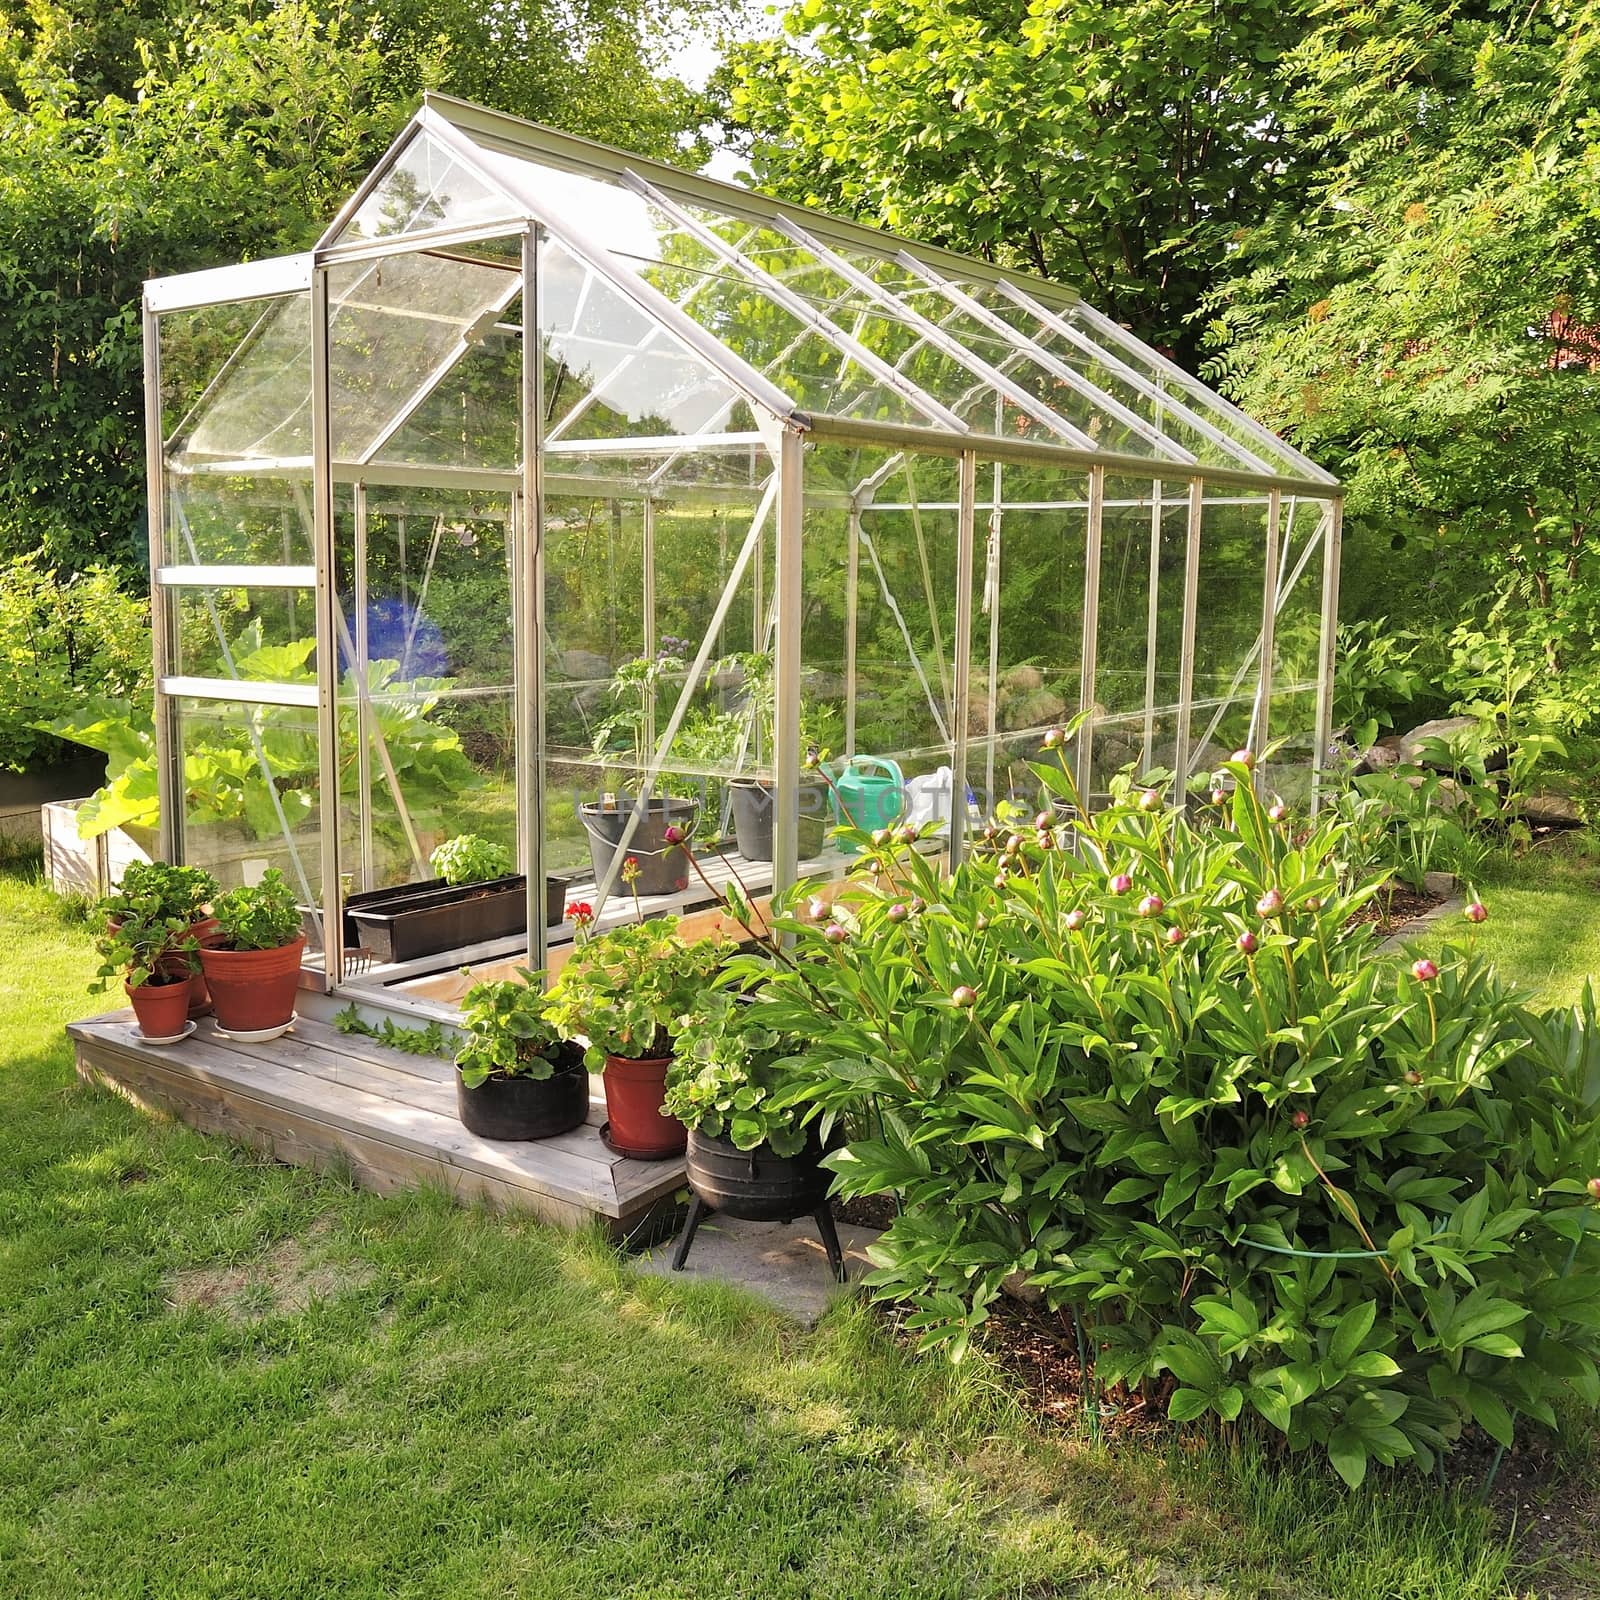 Garden greenhouse by a40757